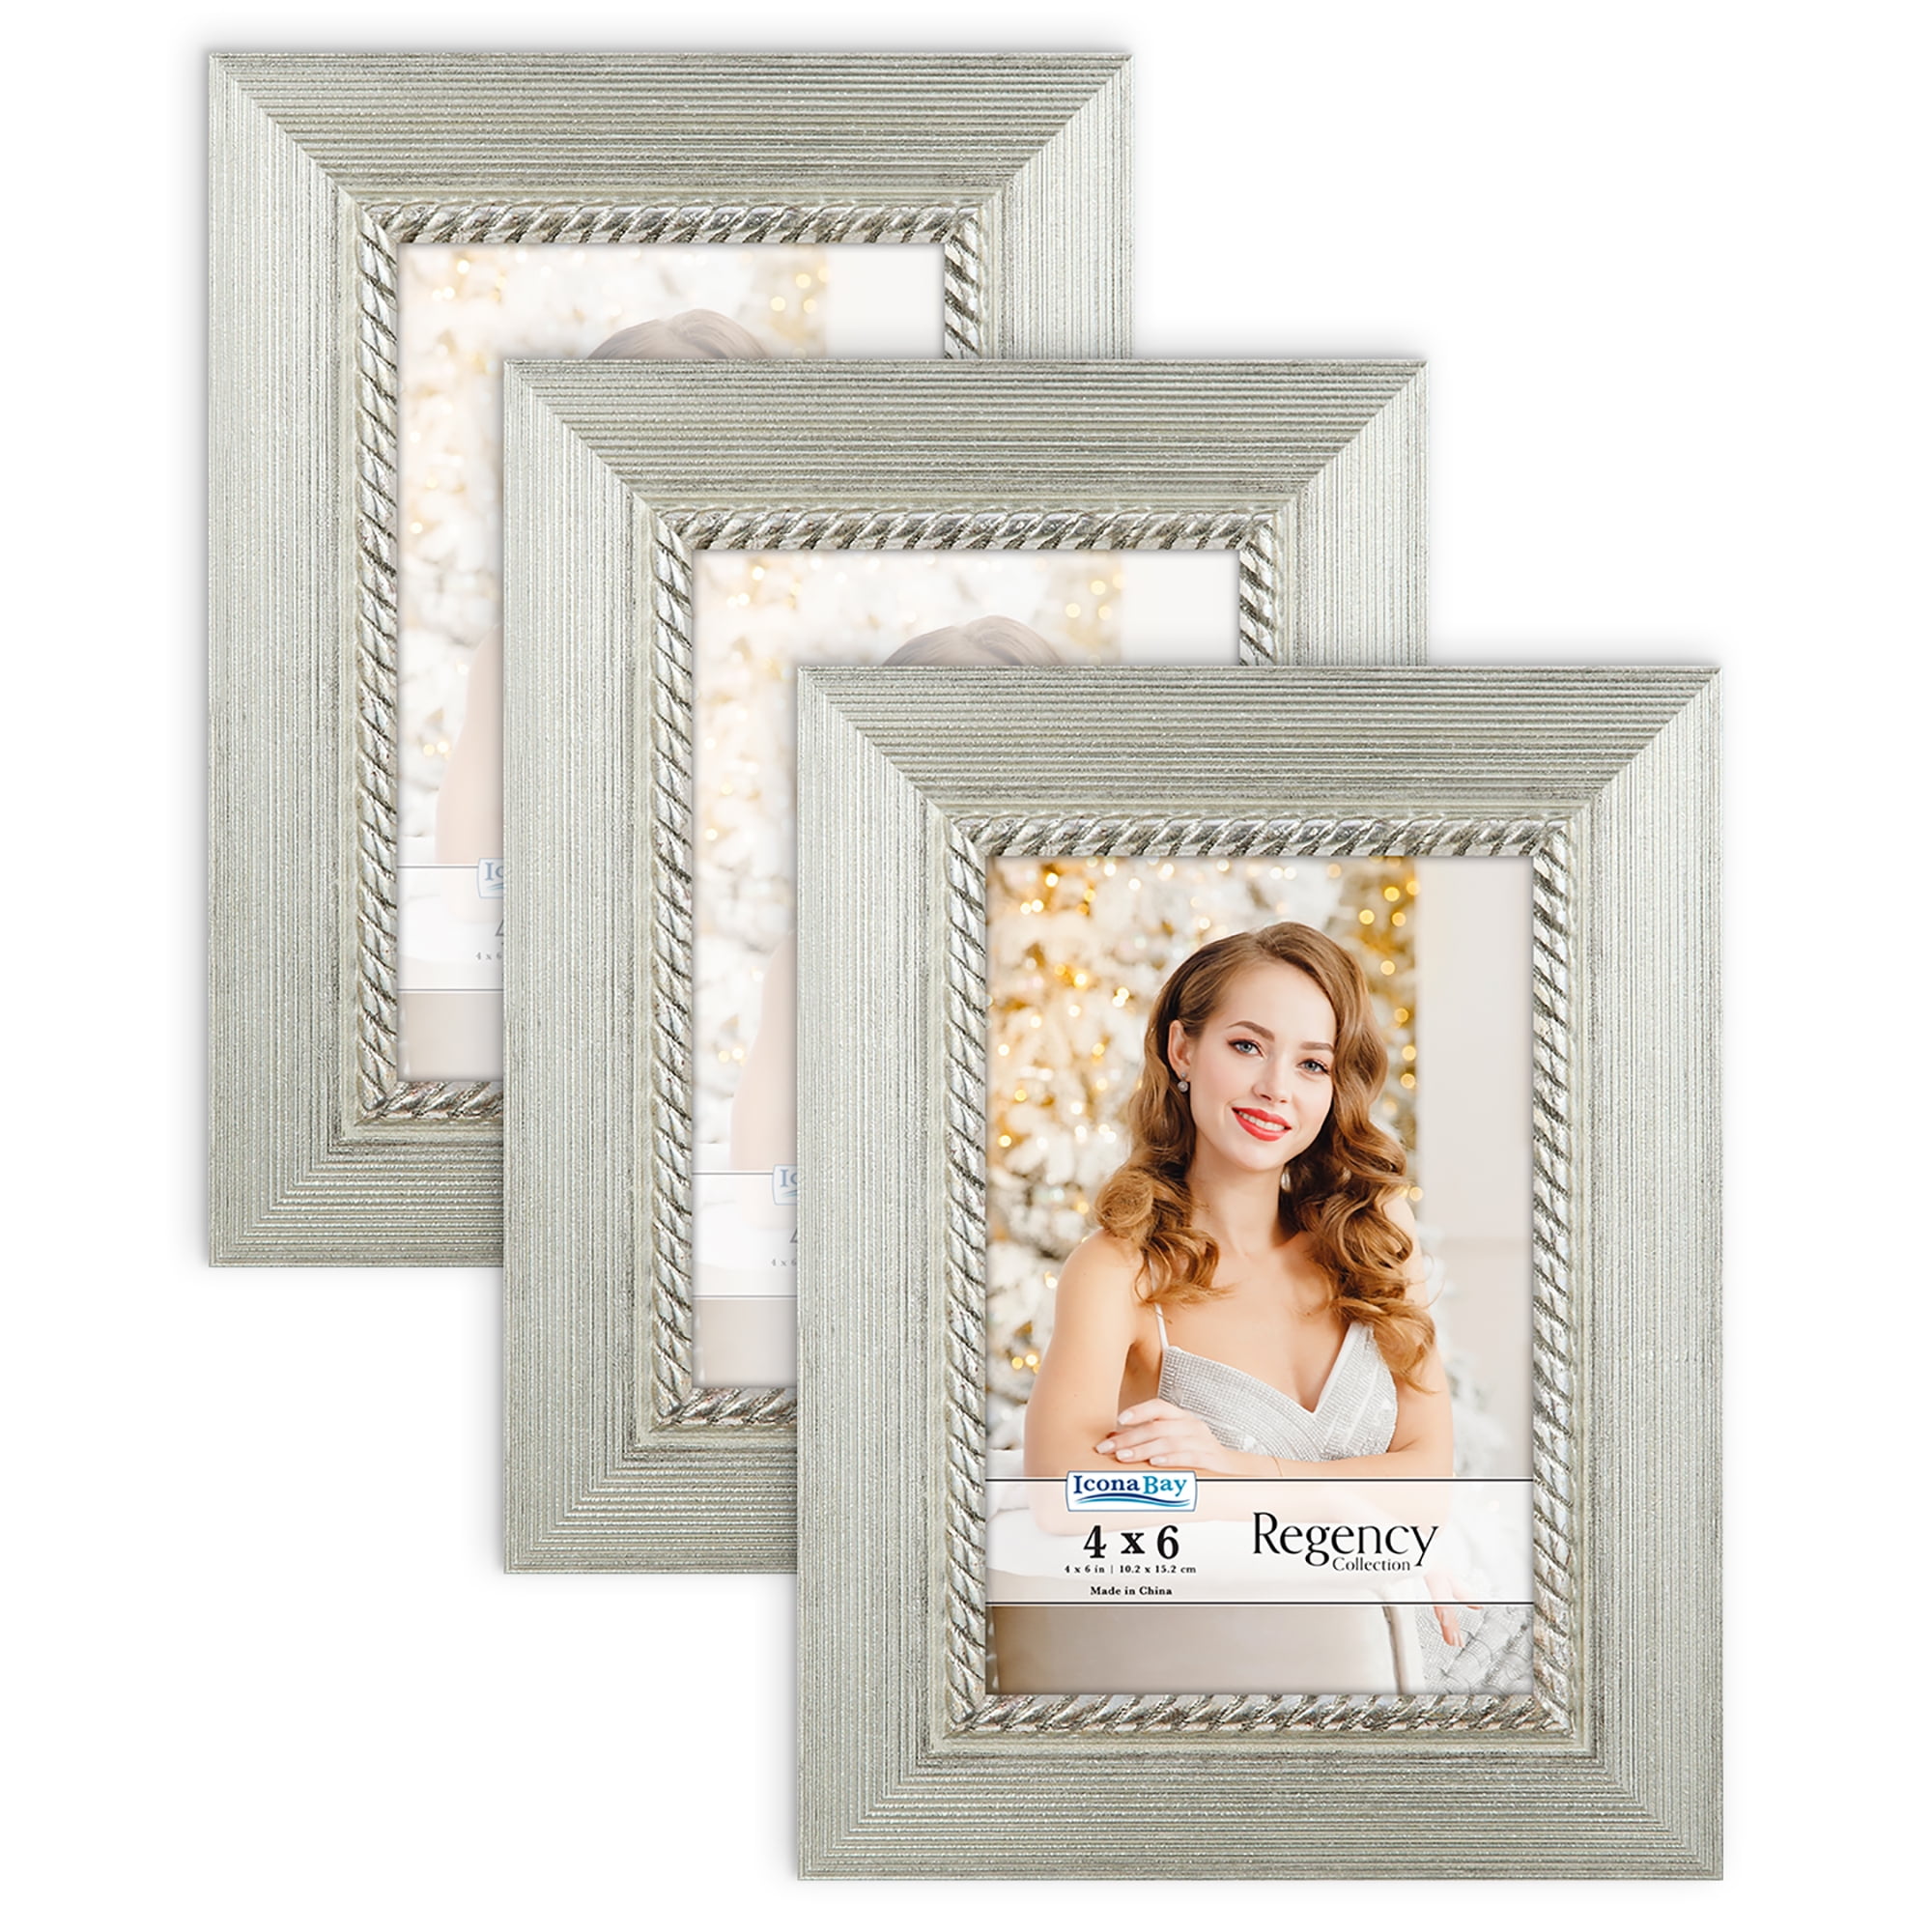 Icona Bay 4x6 Picture Frames (White, 6 Pack), Sturdy Wood Composite Photo  Frames 4 x 6, Sleek Design, Table Top or Wall Mount, Exclusives Collection